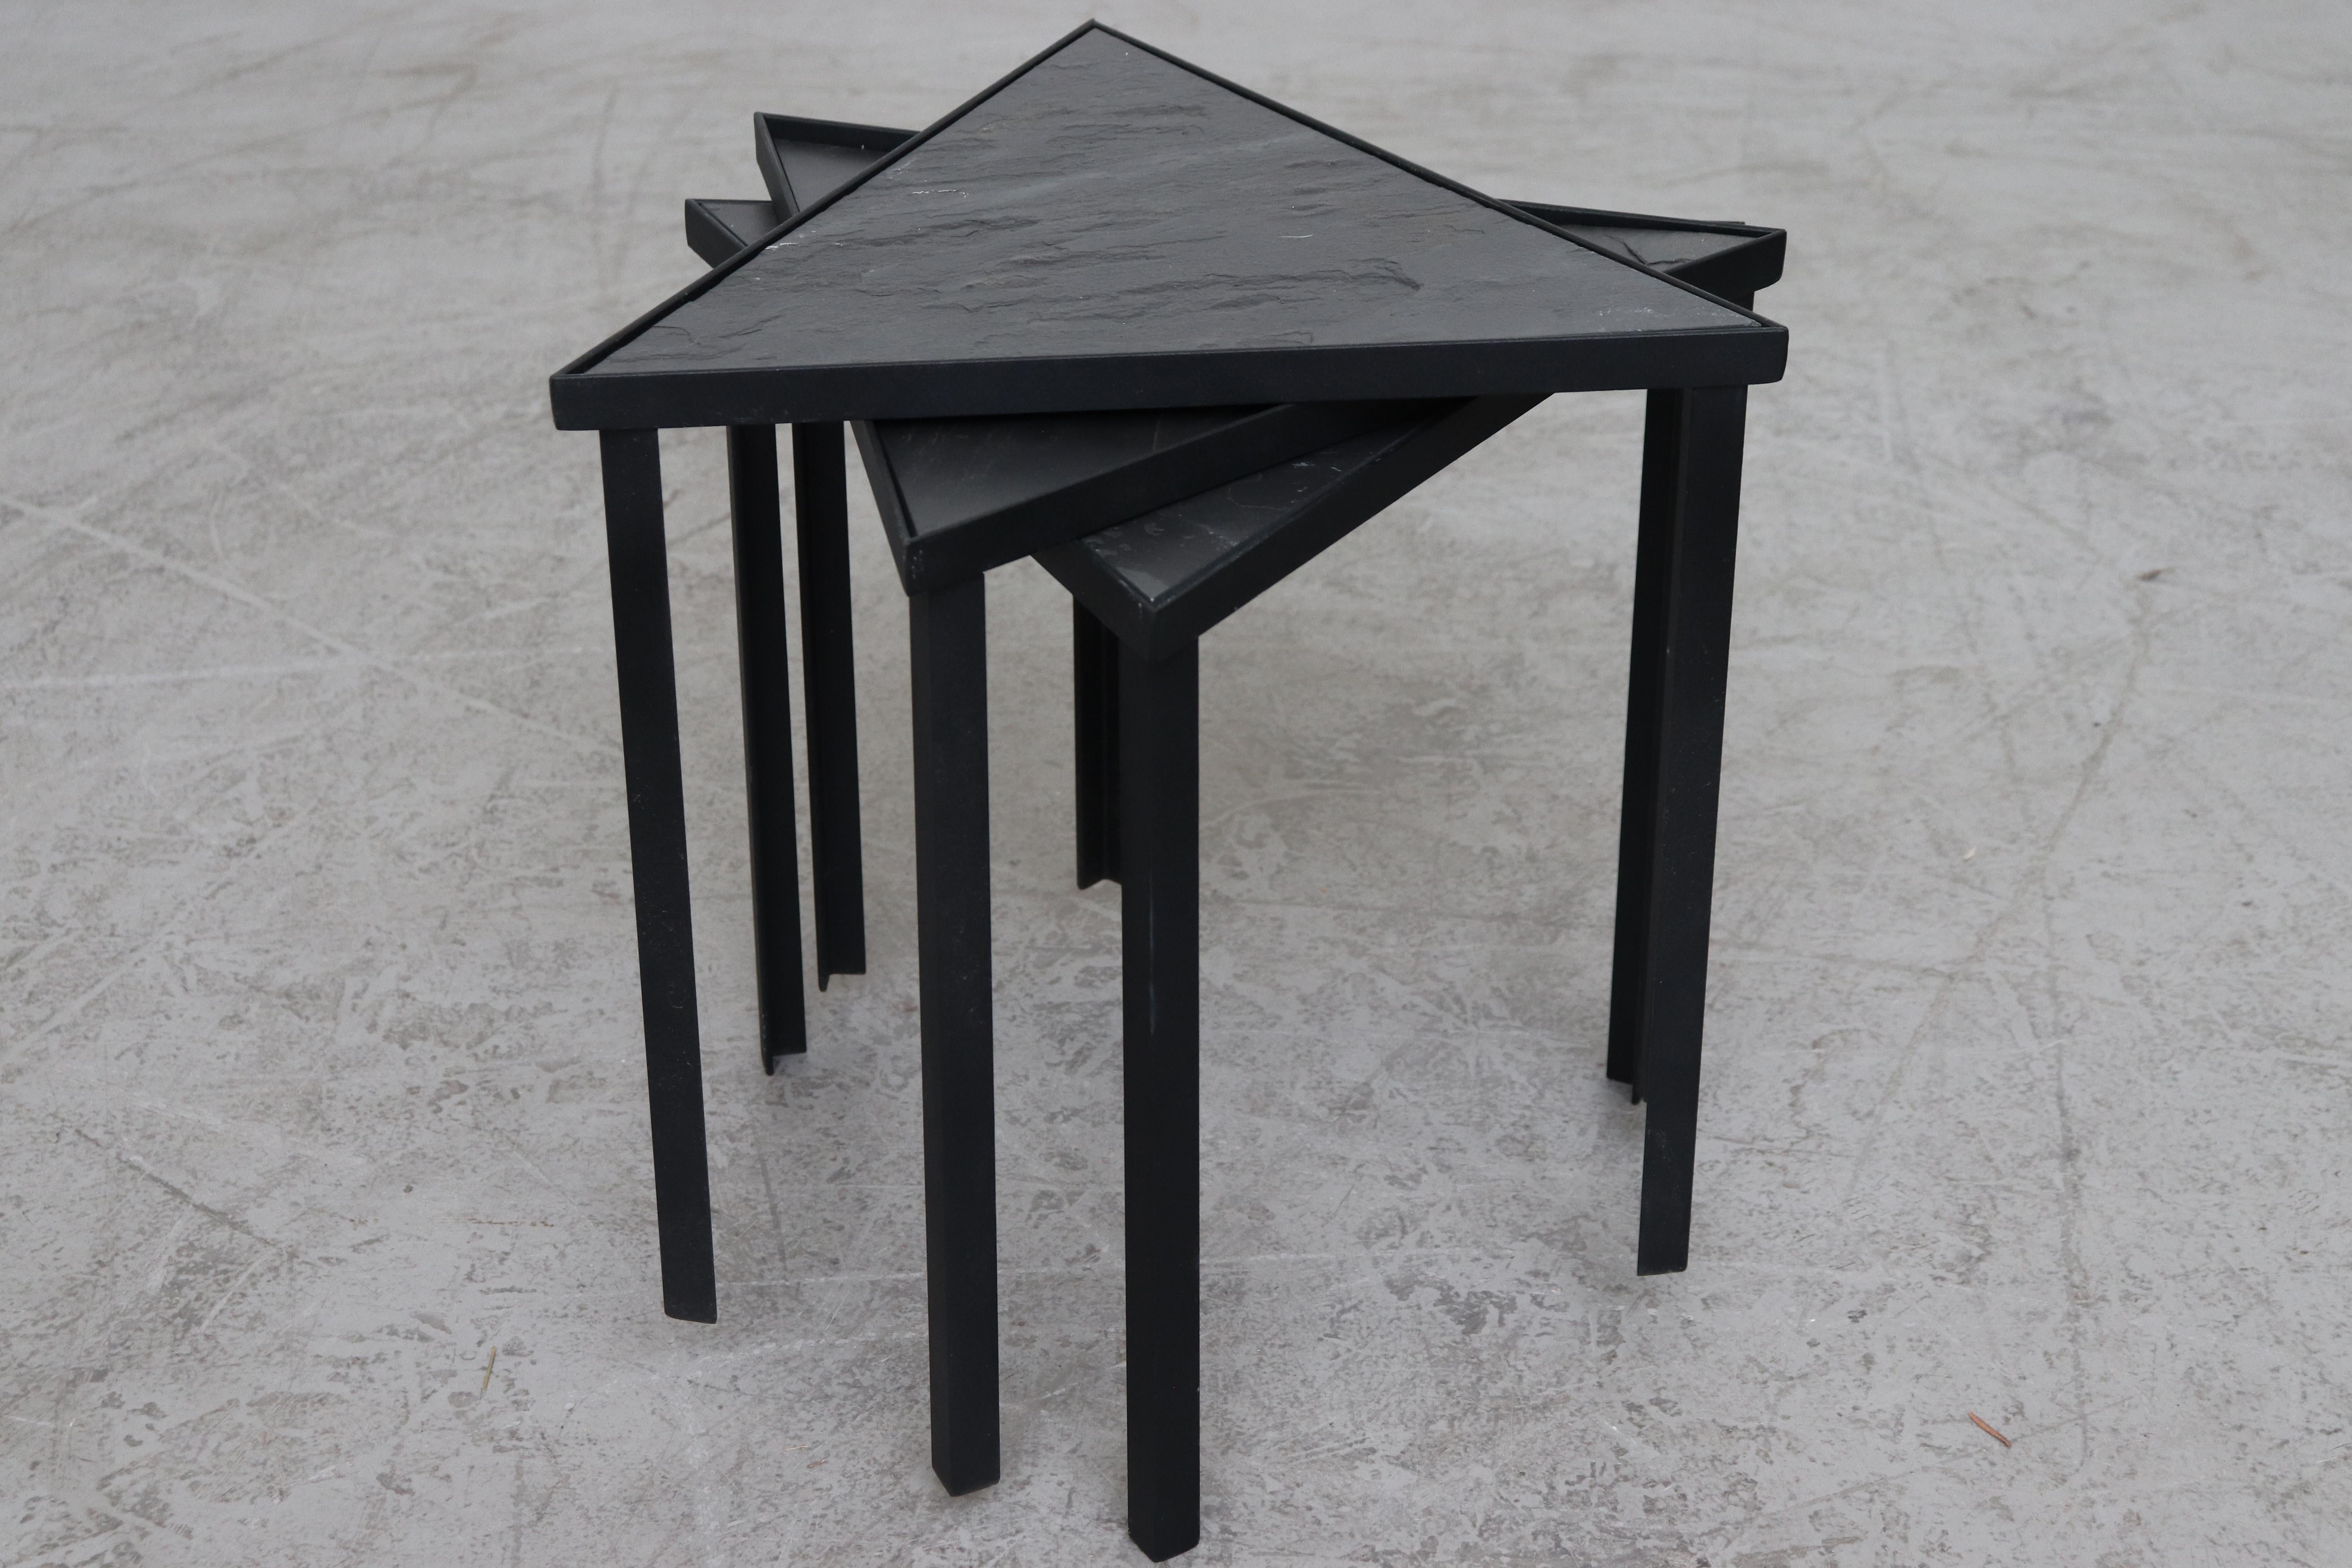 Midcentury inspired triangle slate and metal tables
Set of 3 stacking tables
Black powder coated frame
Measures: 16” x 15” x 16”.
 